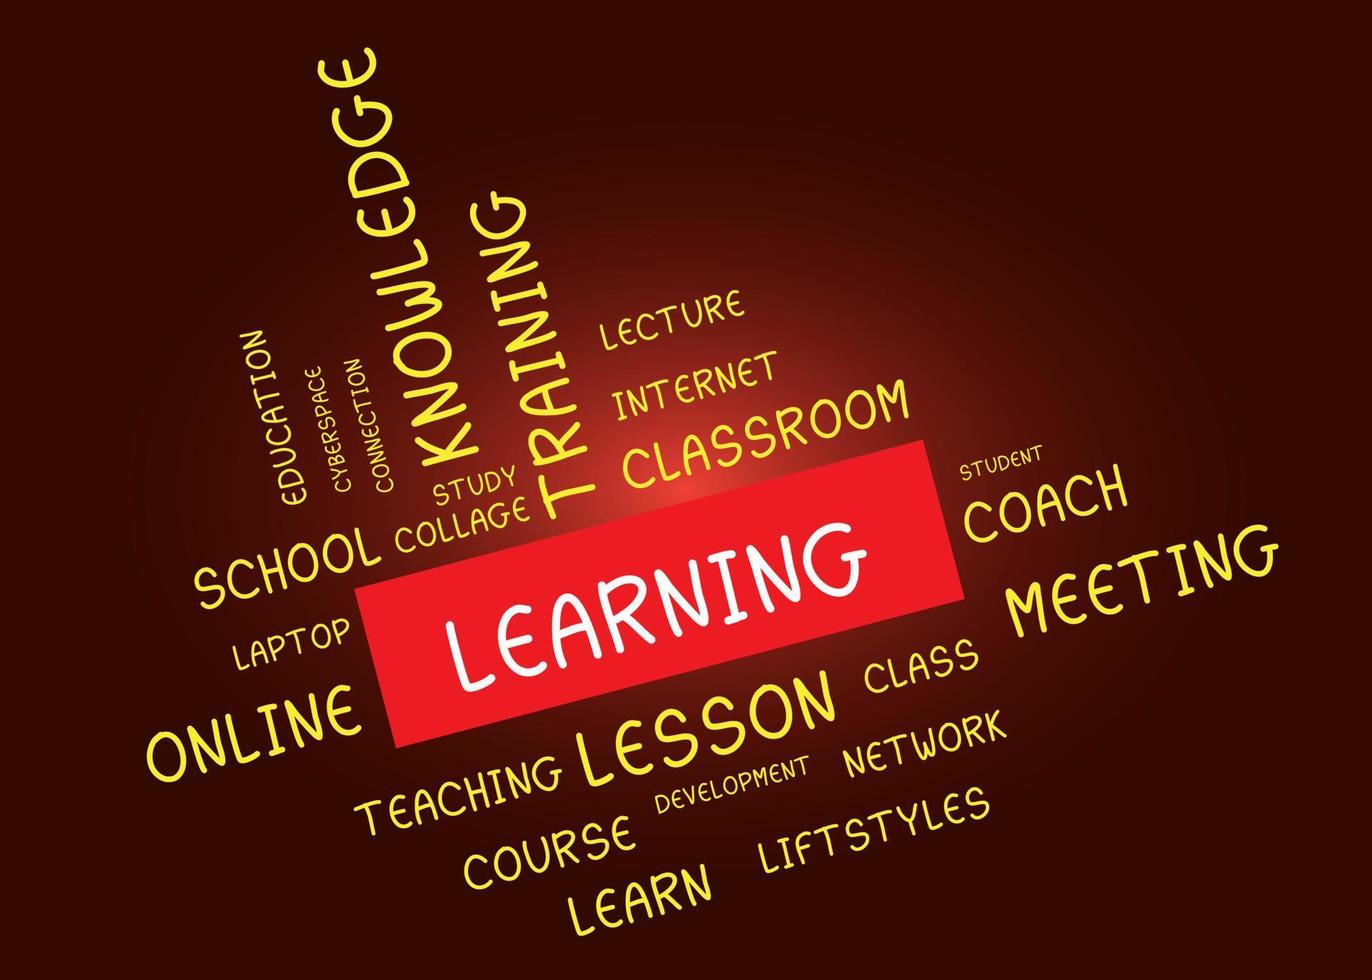 e-learning education concept online learning with webinars, video tutorials, internet lessons vector